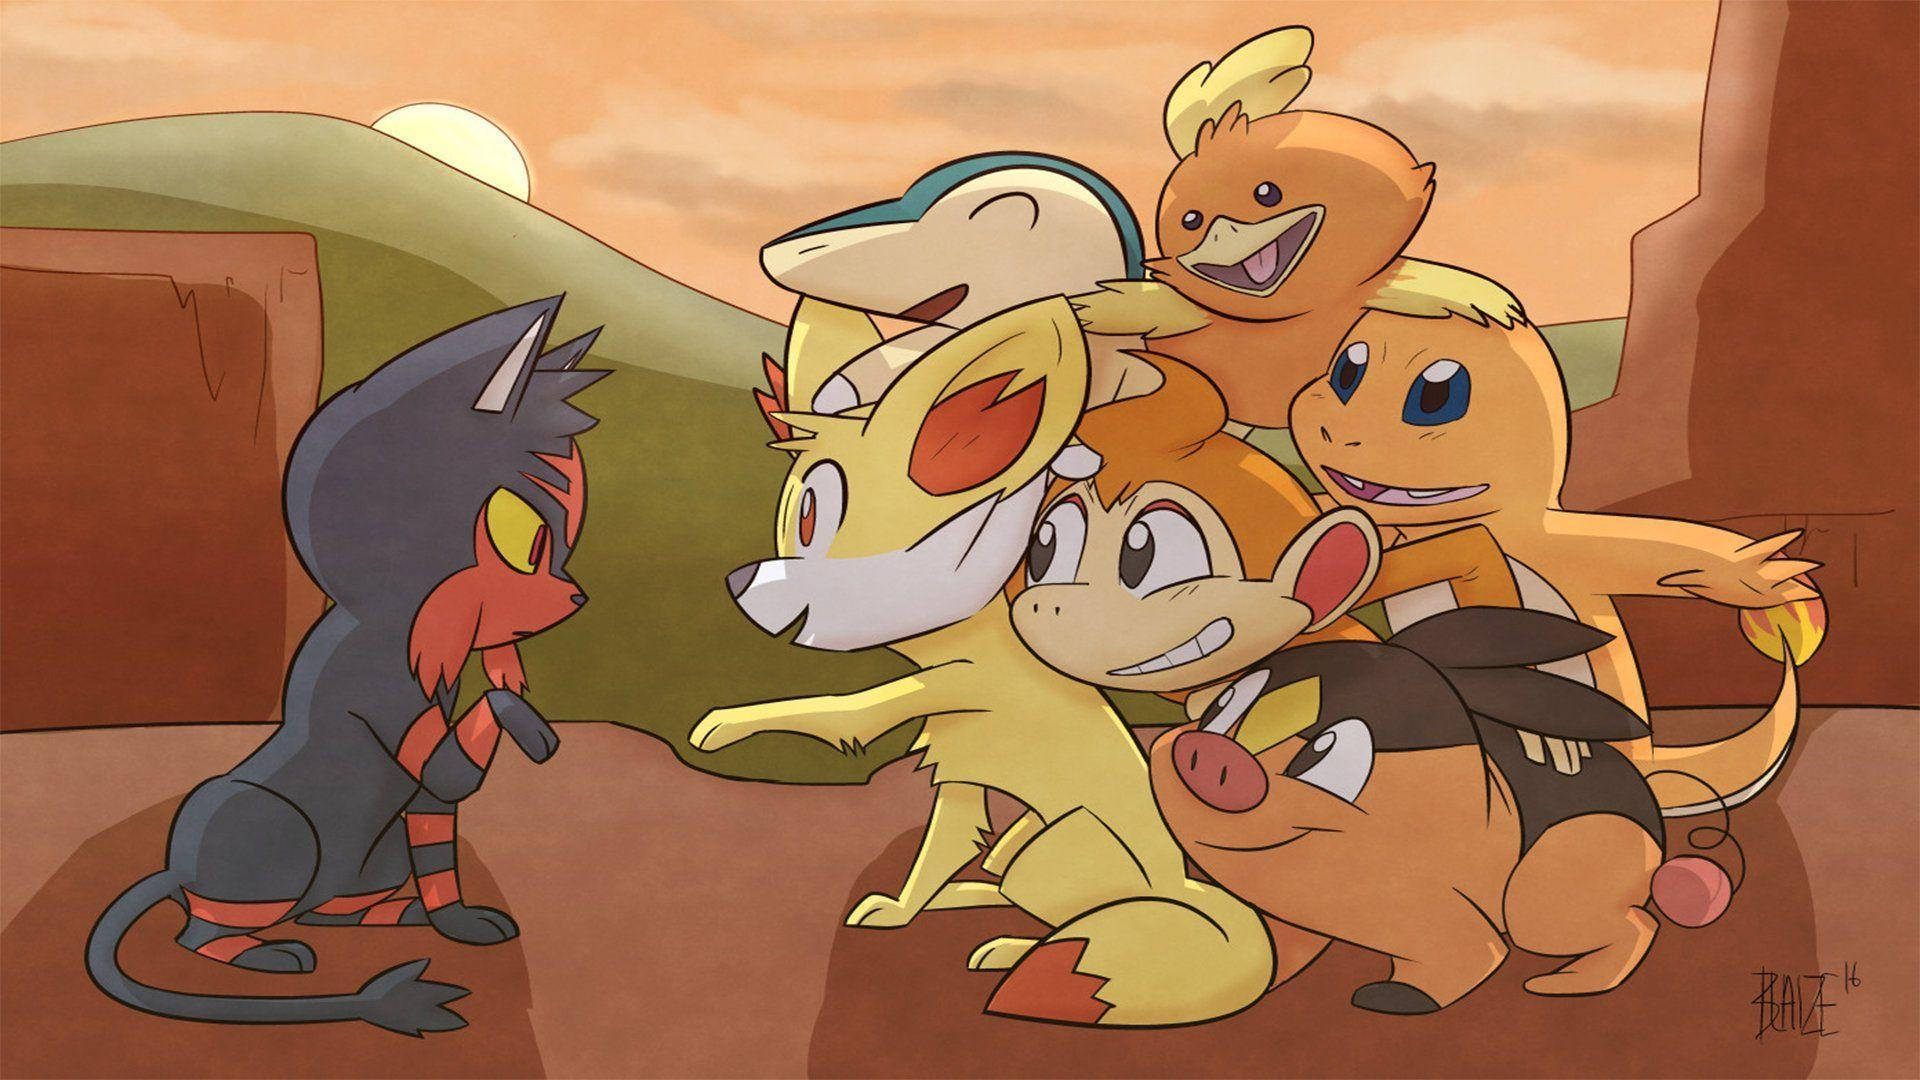 Chimchar With Litten And Other Pokemon Wallpaper